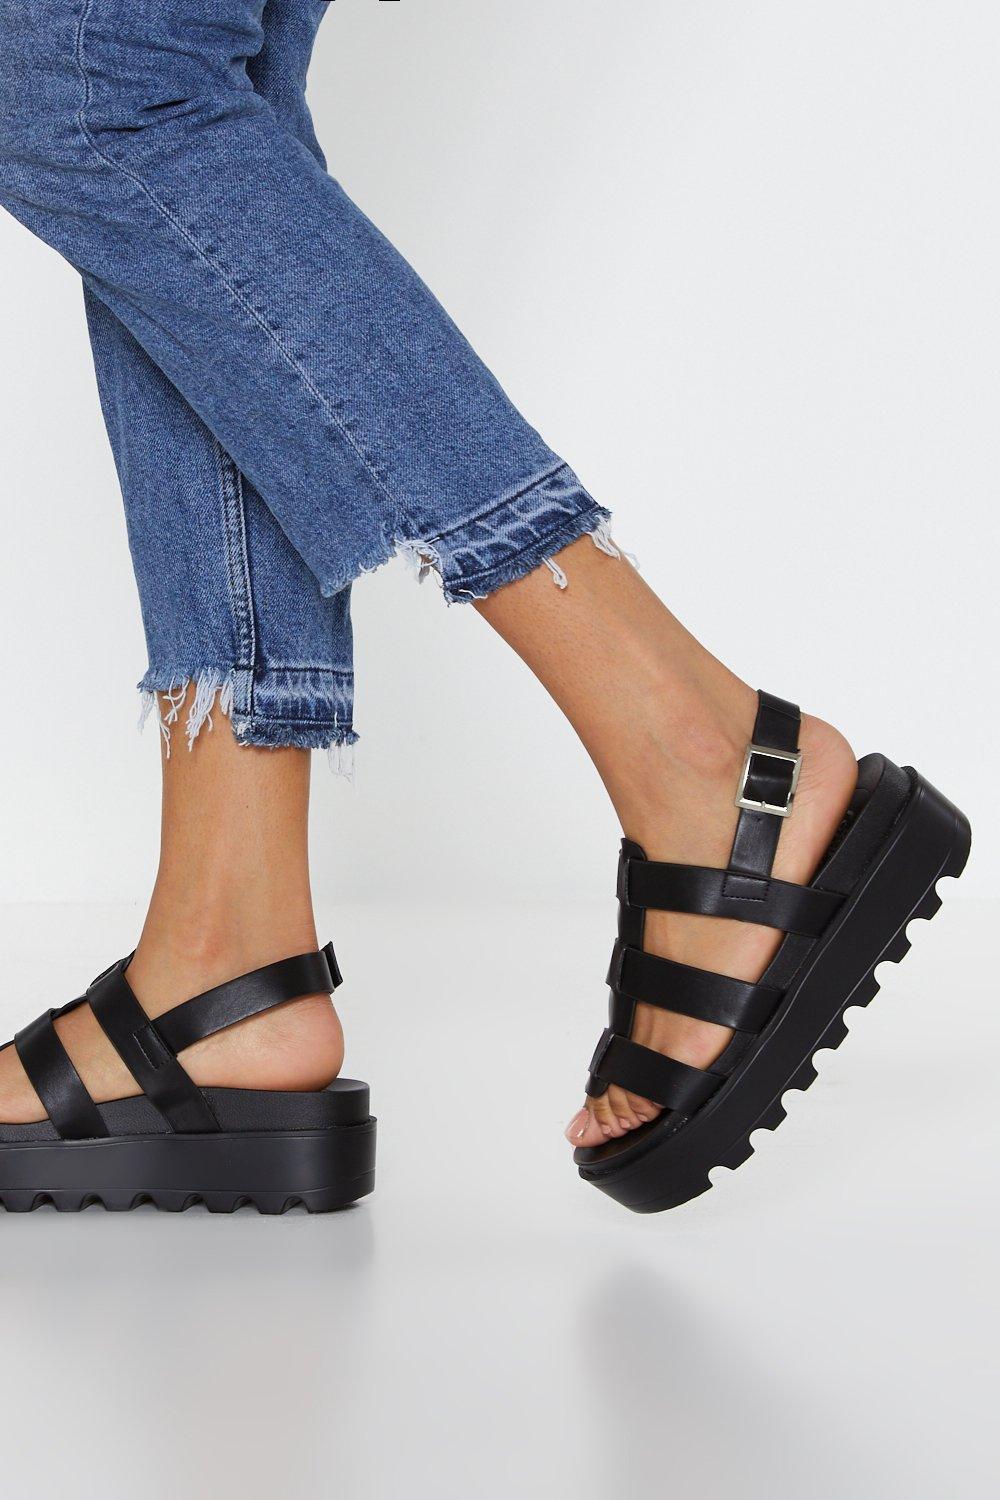 Nasty Gal Strappy Cleated Platform Sandals in Black | Lyst